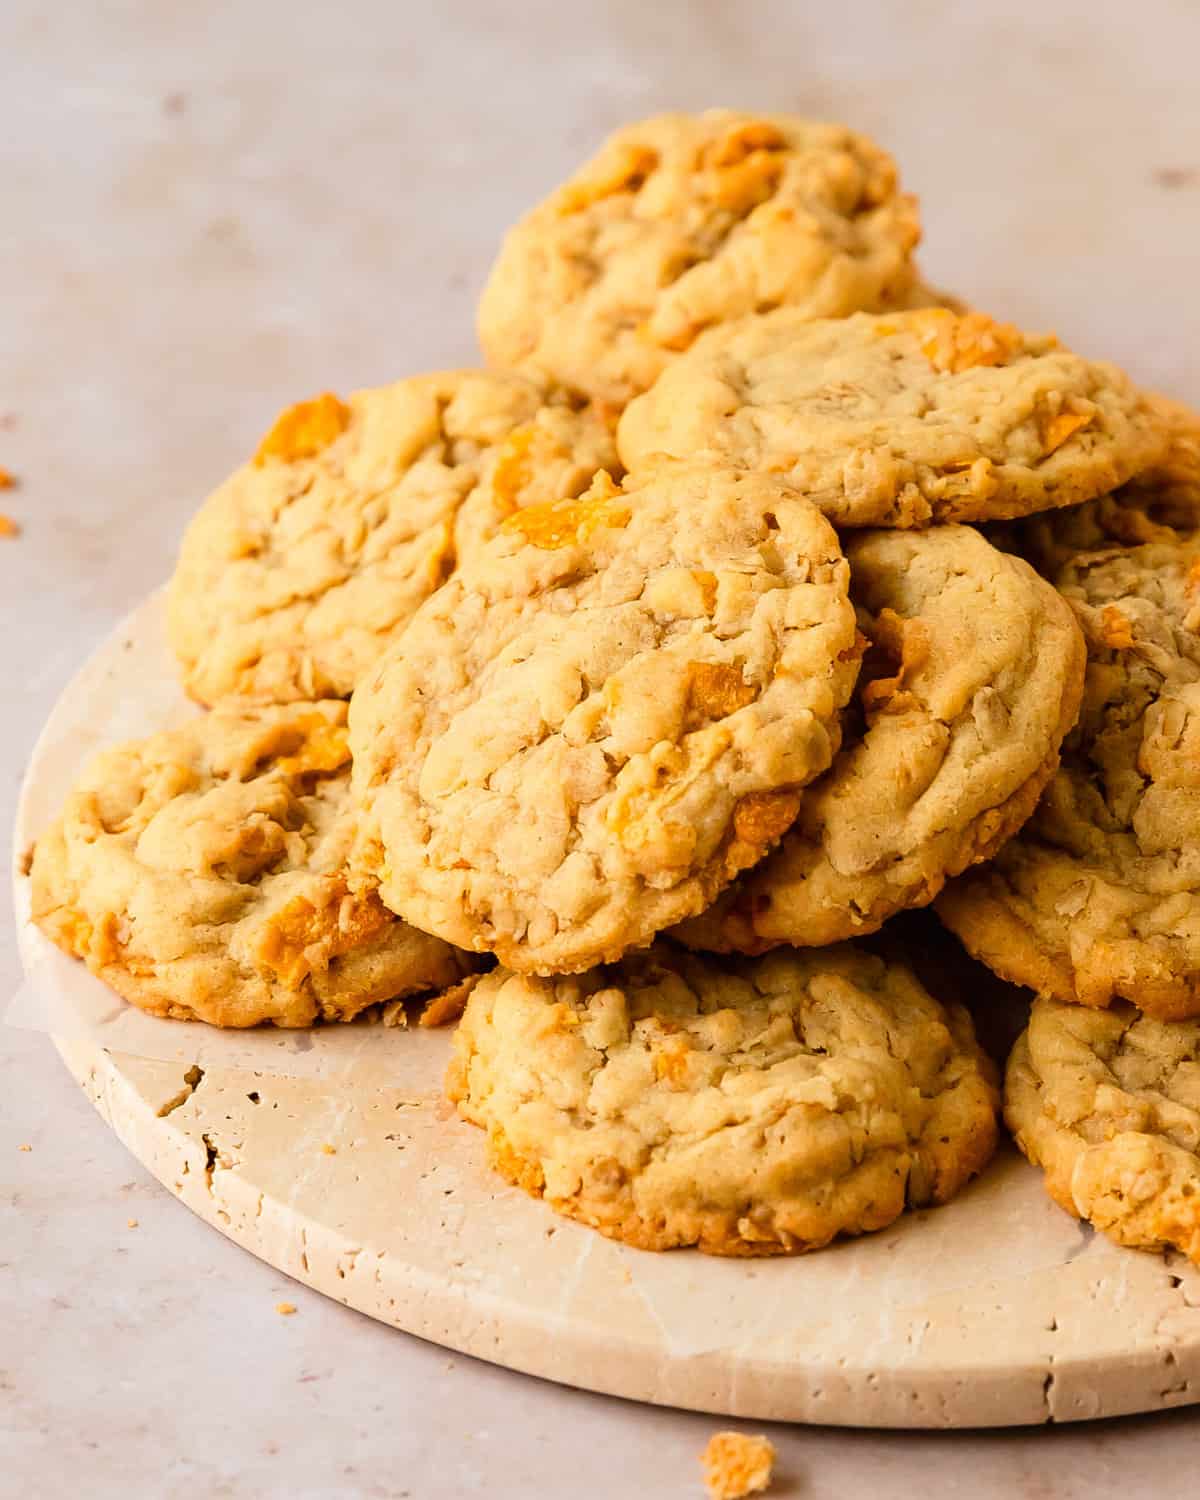 Cornflake cookies are thick and buttery cookies filled with old fashioned oats and cornflakes. These cookies with corn flakes have crisp edges and chewy centers. This cornflake cookie recipe easy to make, bake and enjoy in under an hour. 